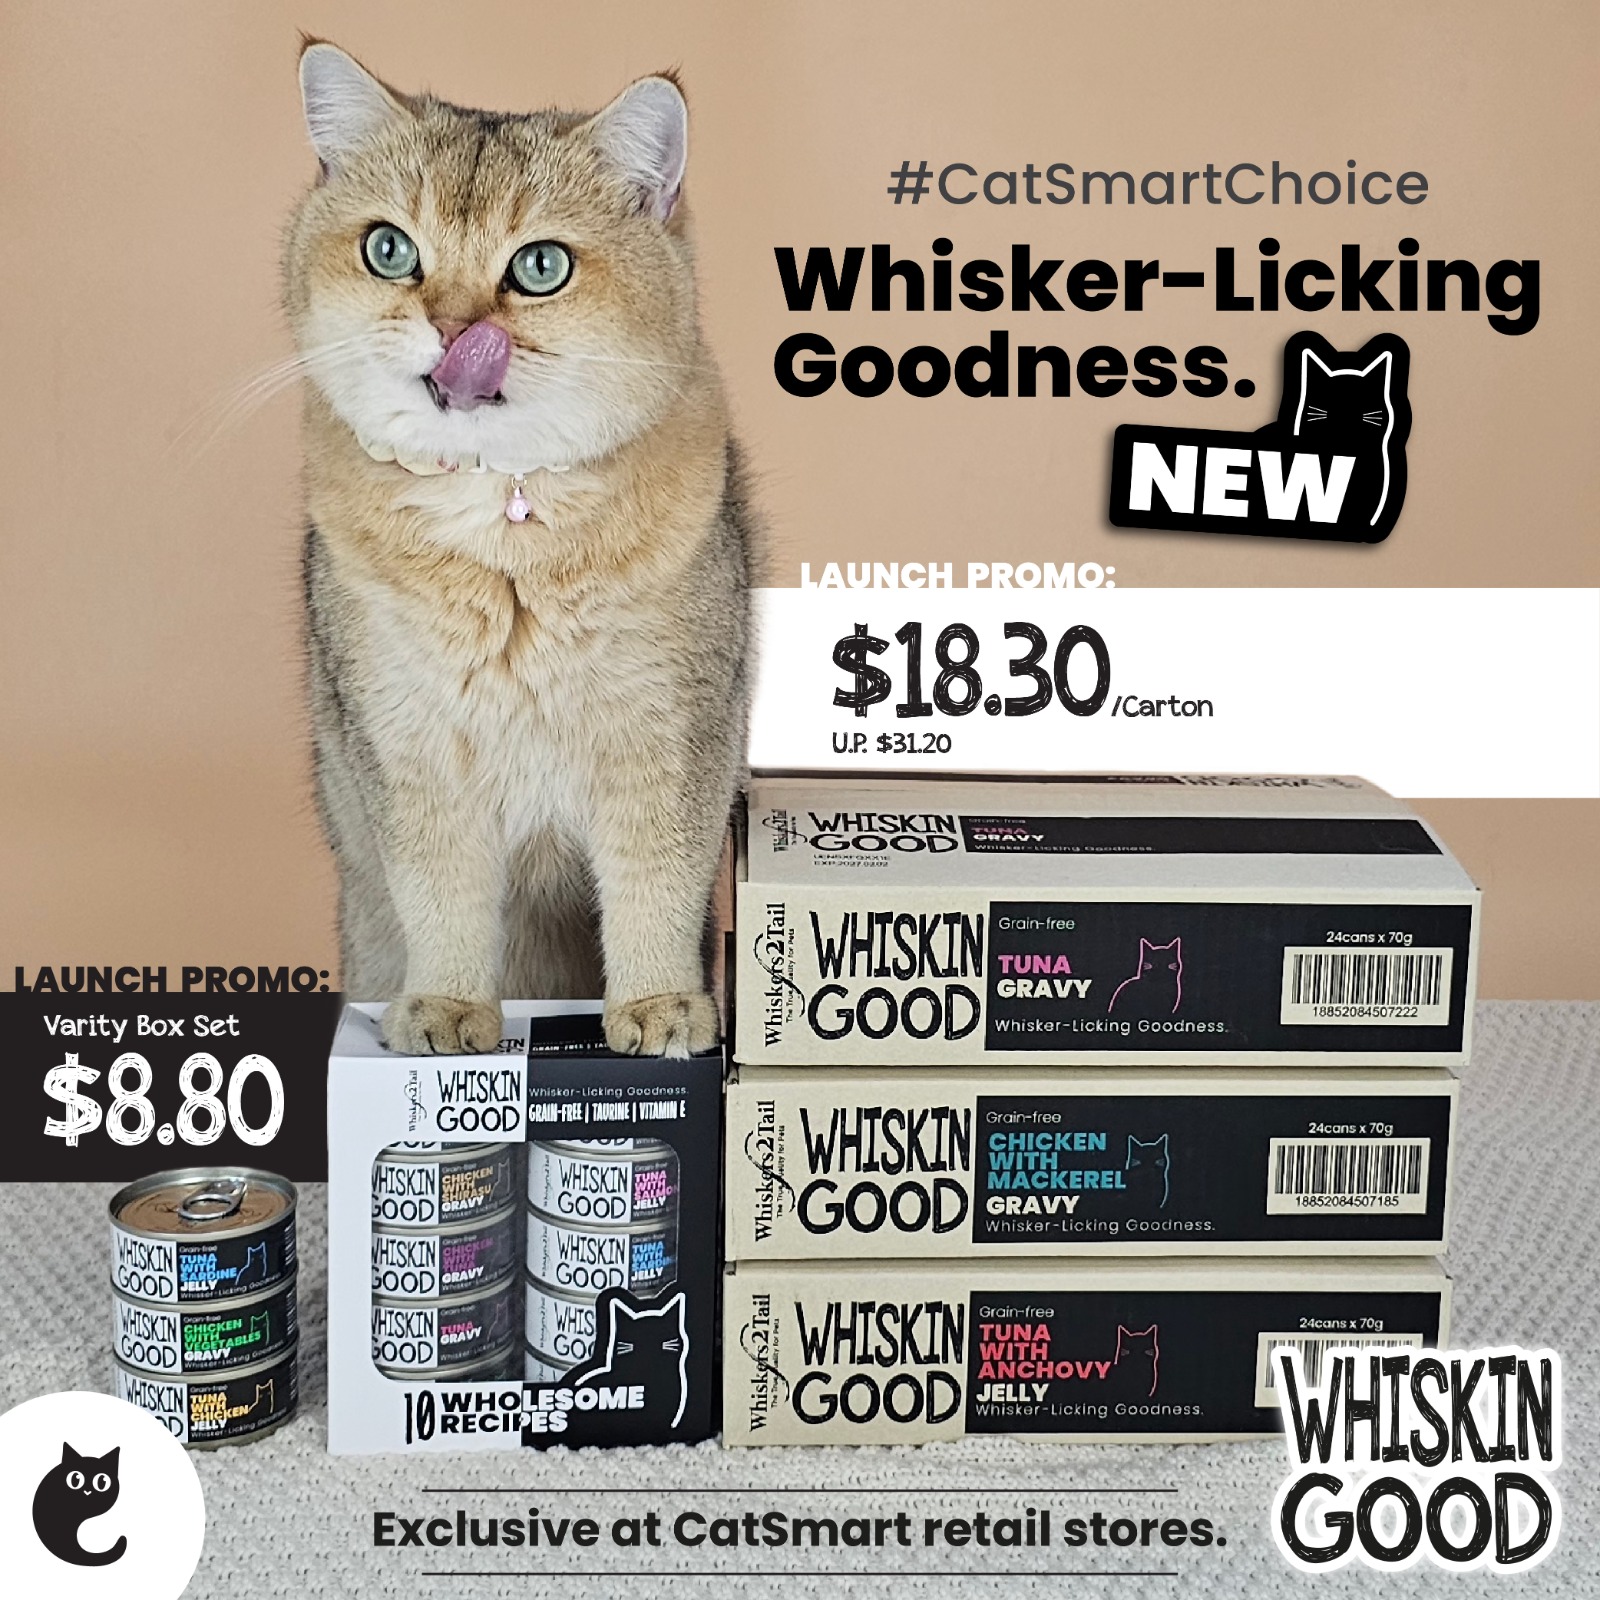 Meet our NEW whisker-licking wet food, WhiskinGood